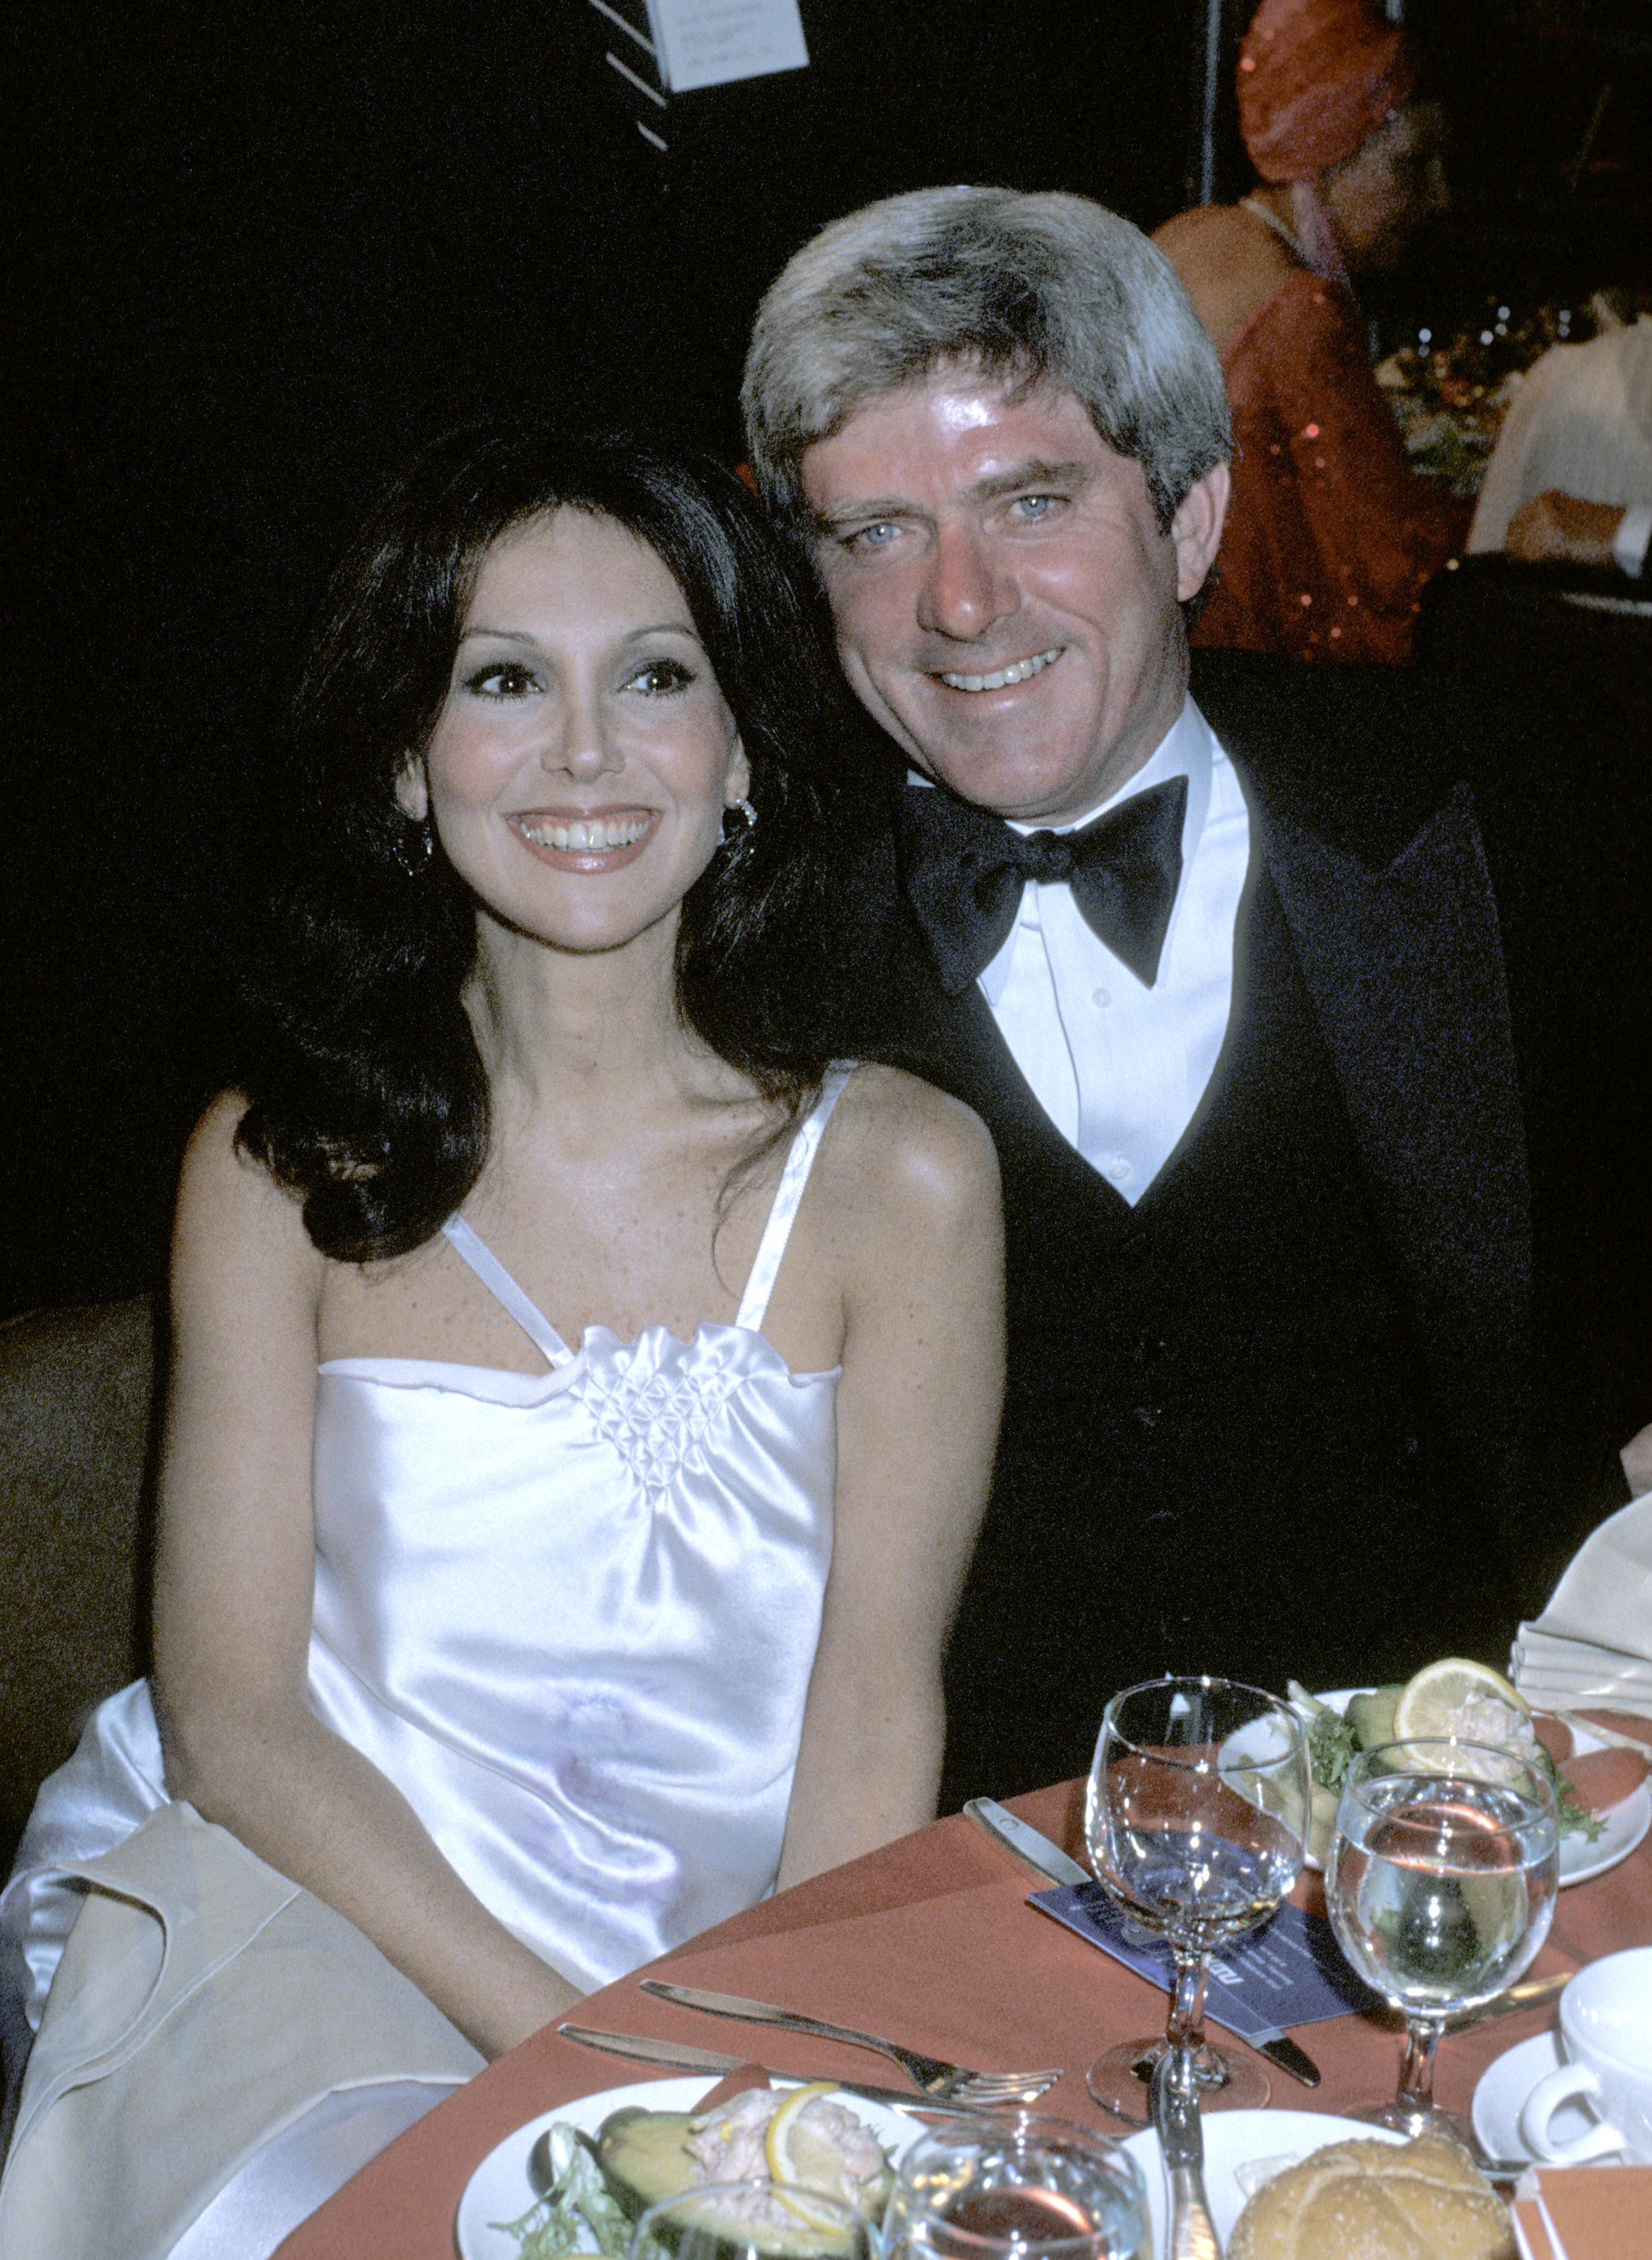 Marlo Thomas and Phil Donahue at the Iris Awards Banquet in 1978 | Source: Getty Images